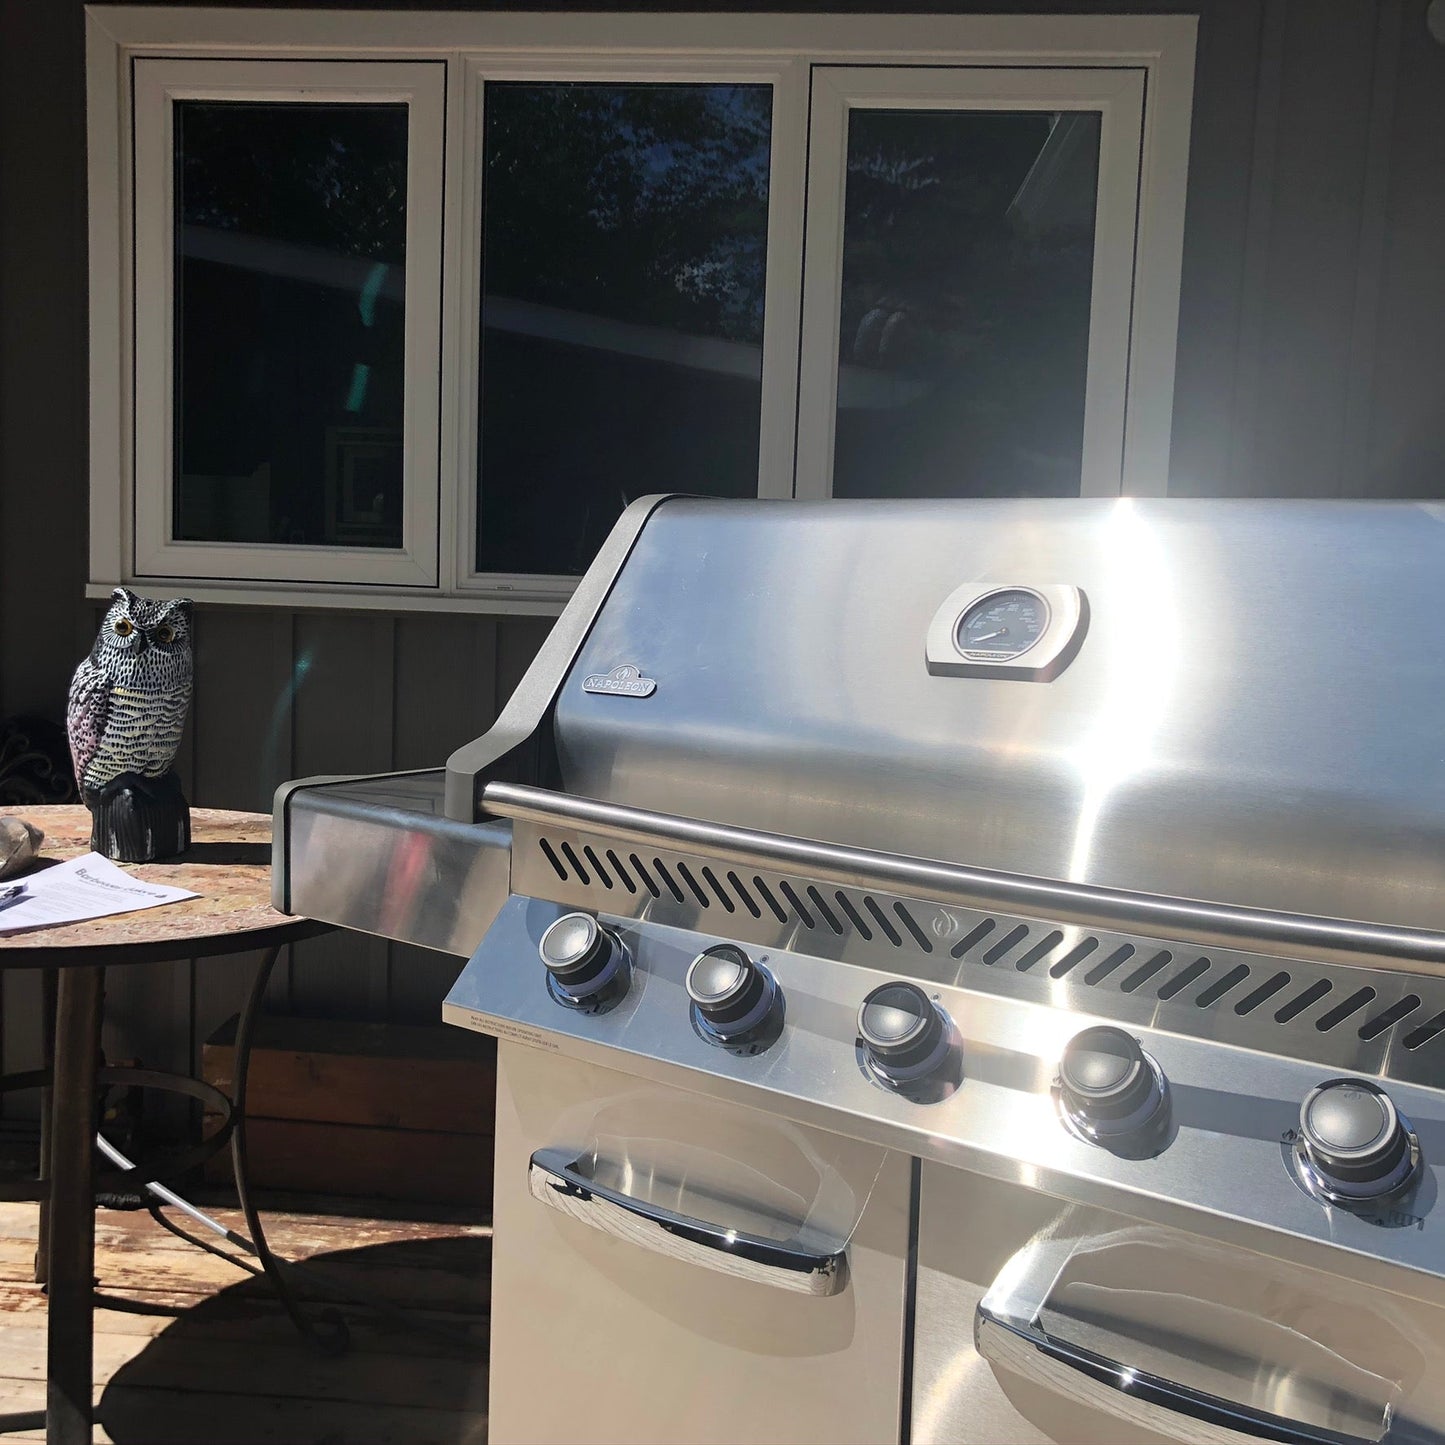 Napoleon P665 Stainless Steel Grill - Natural Gas | Lots of space for lots of food, this grill is the ultimate tool to big cookouts this summer | Barbecues Galore: Burlington, Oakville, Etobicoke & Calgary